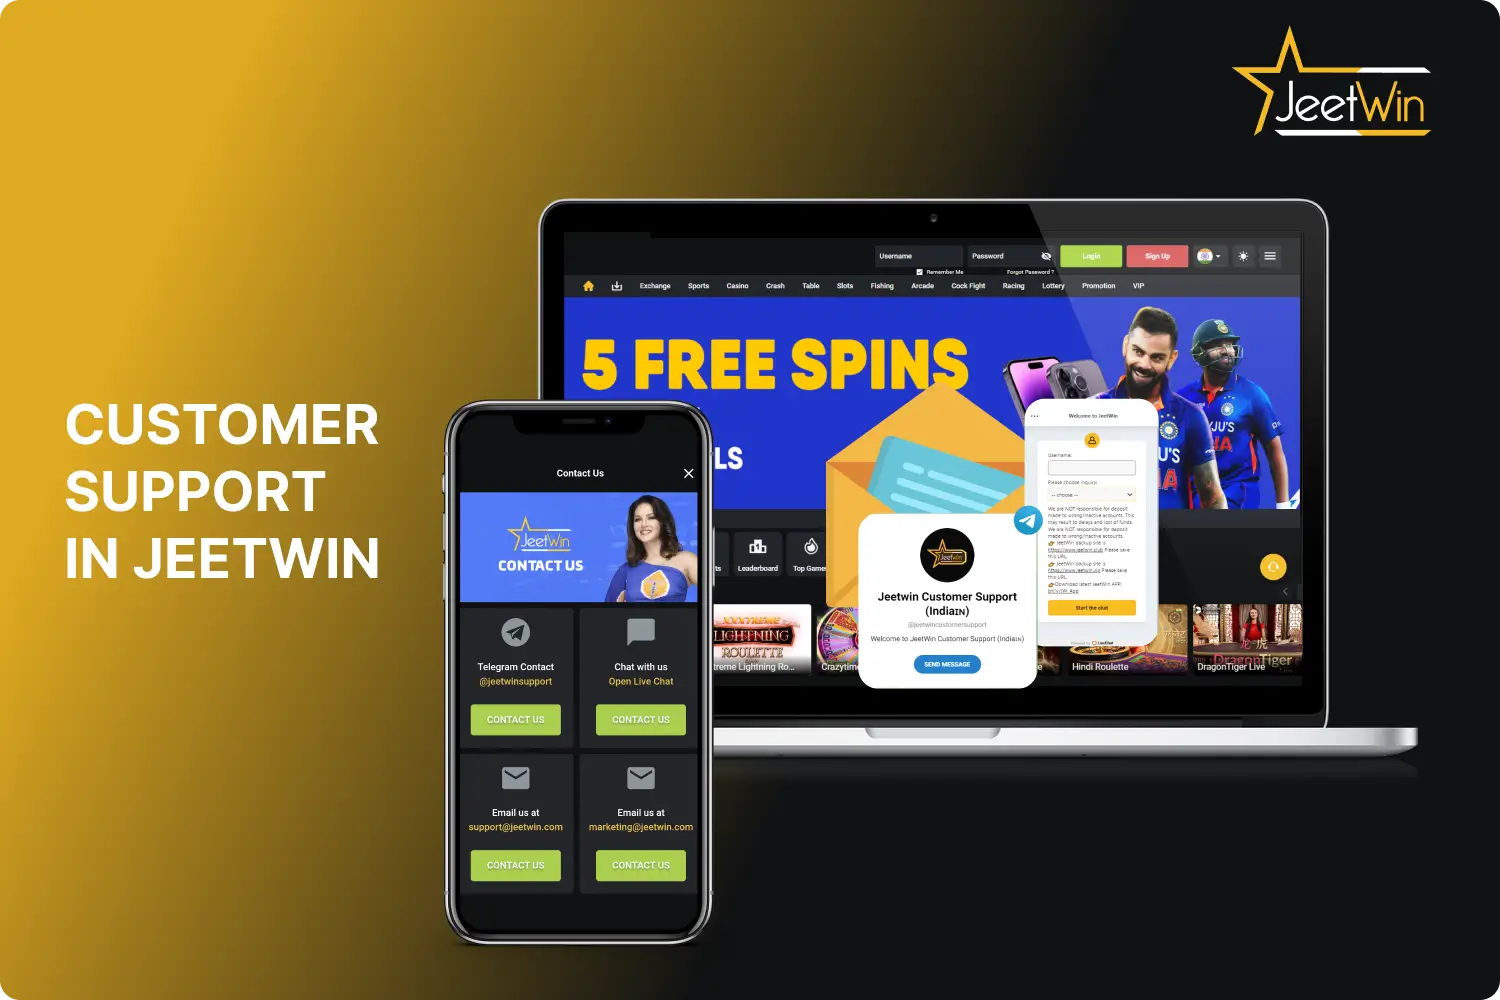 Players in India can contact Jeetwin online casino customer support in a number of ways